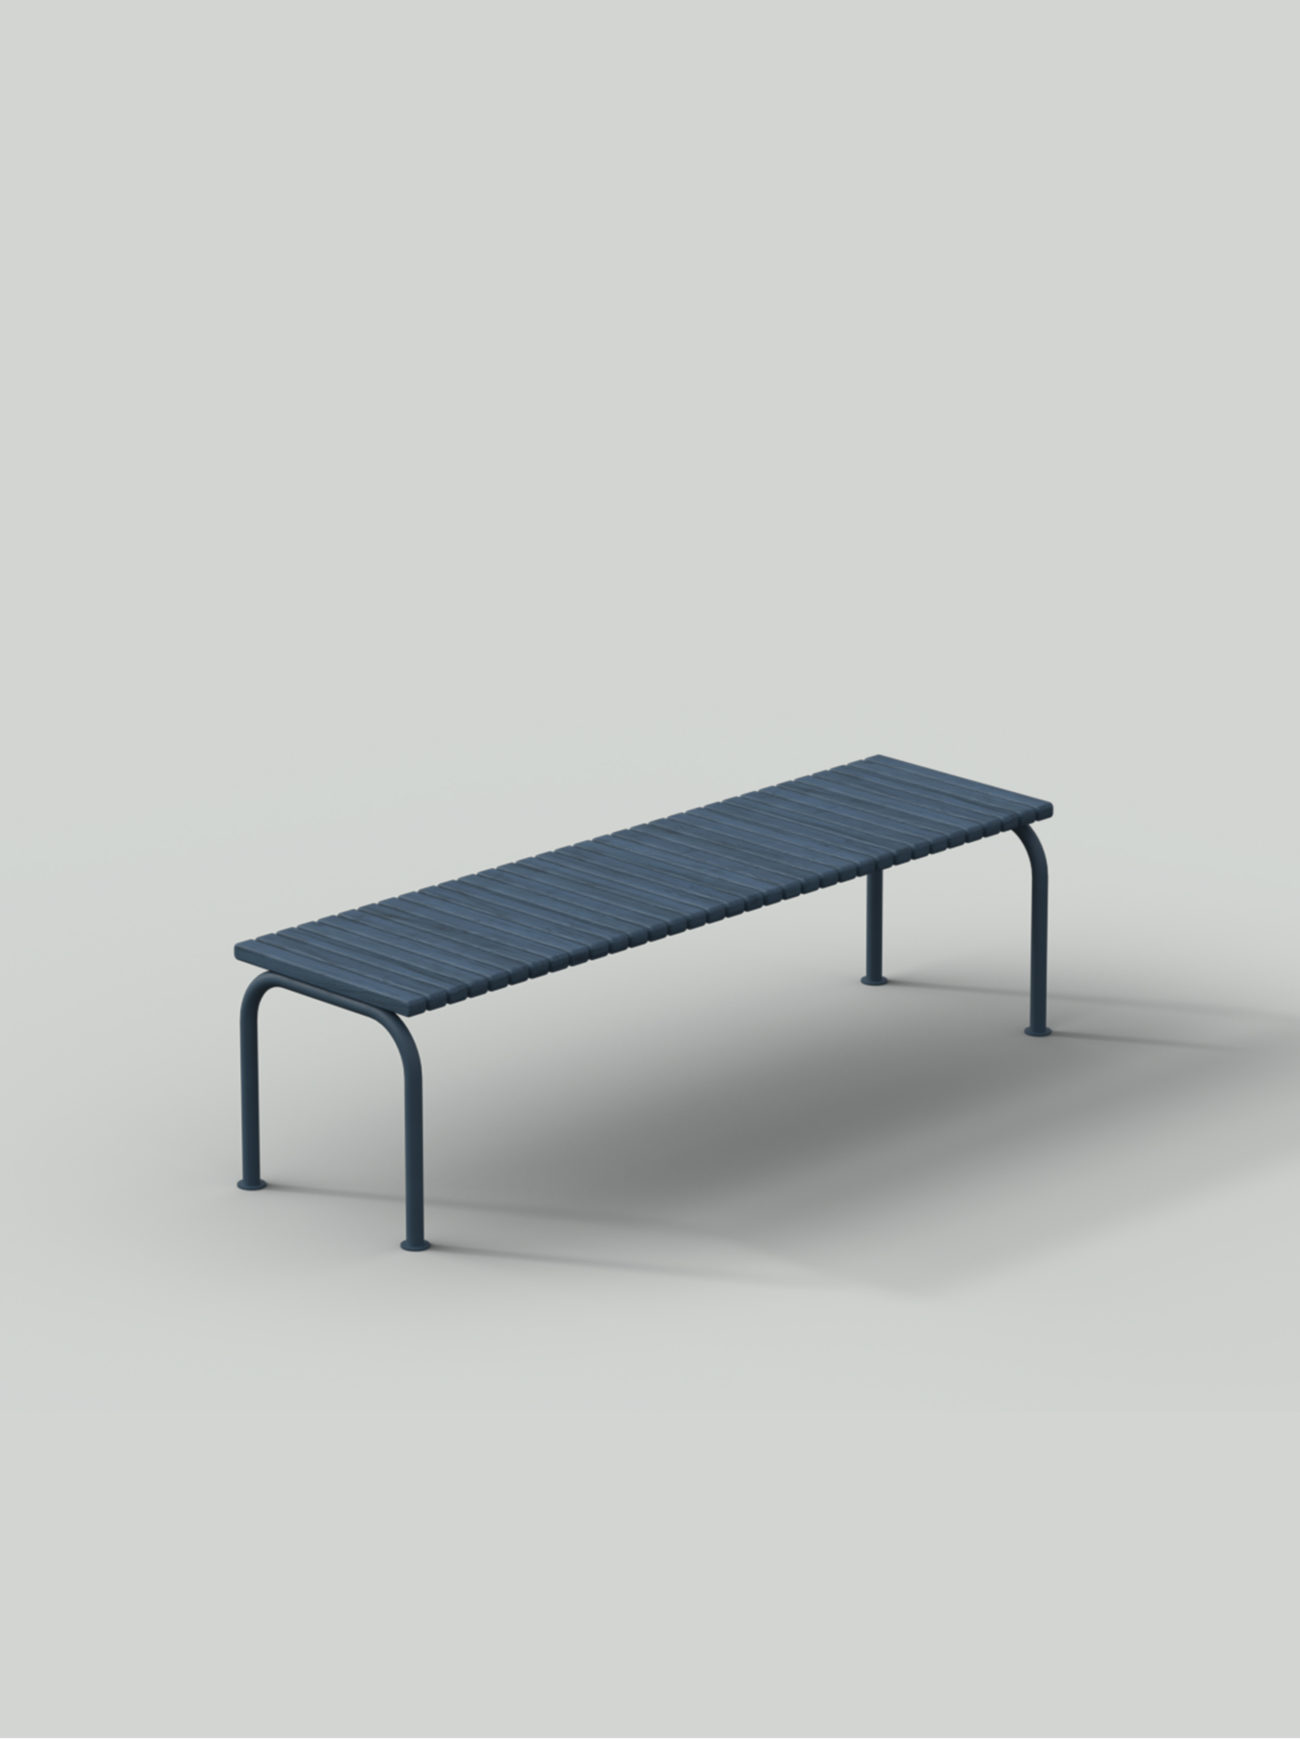 Blue bench with steel frame and wood planks